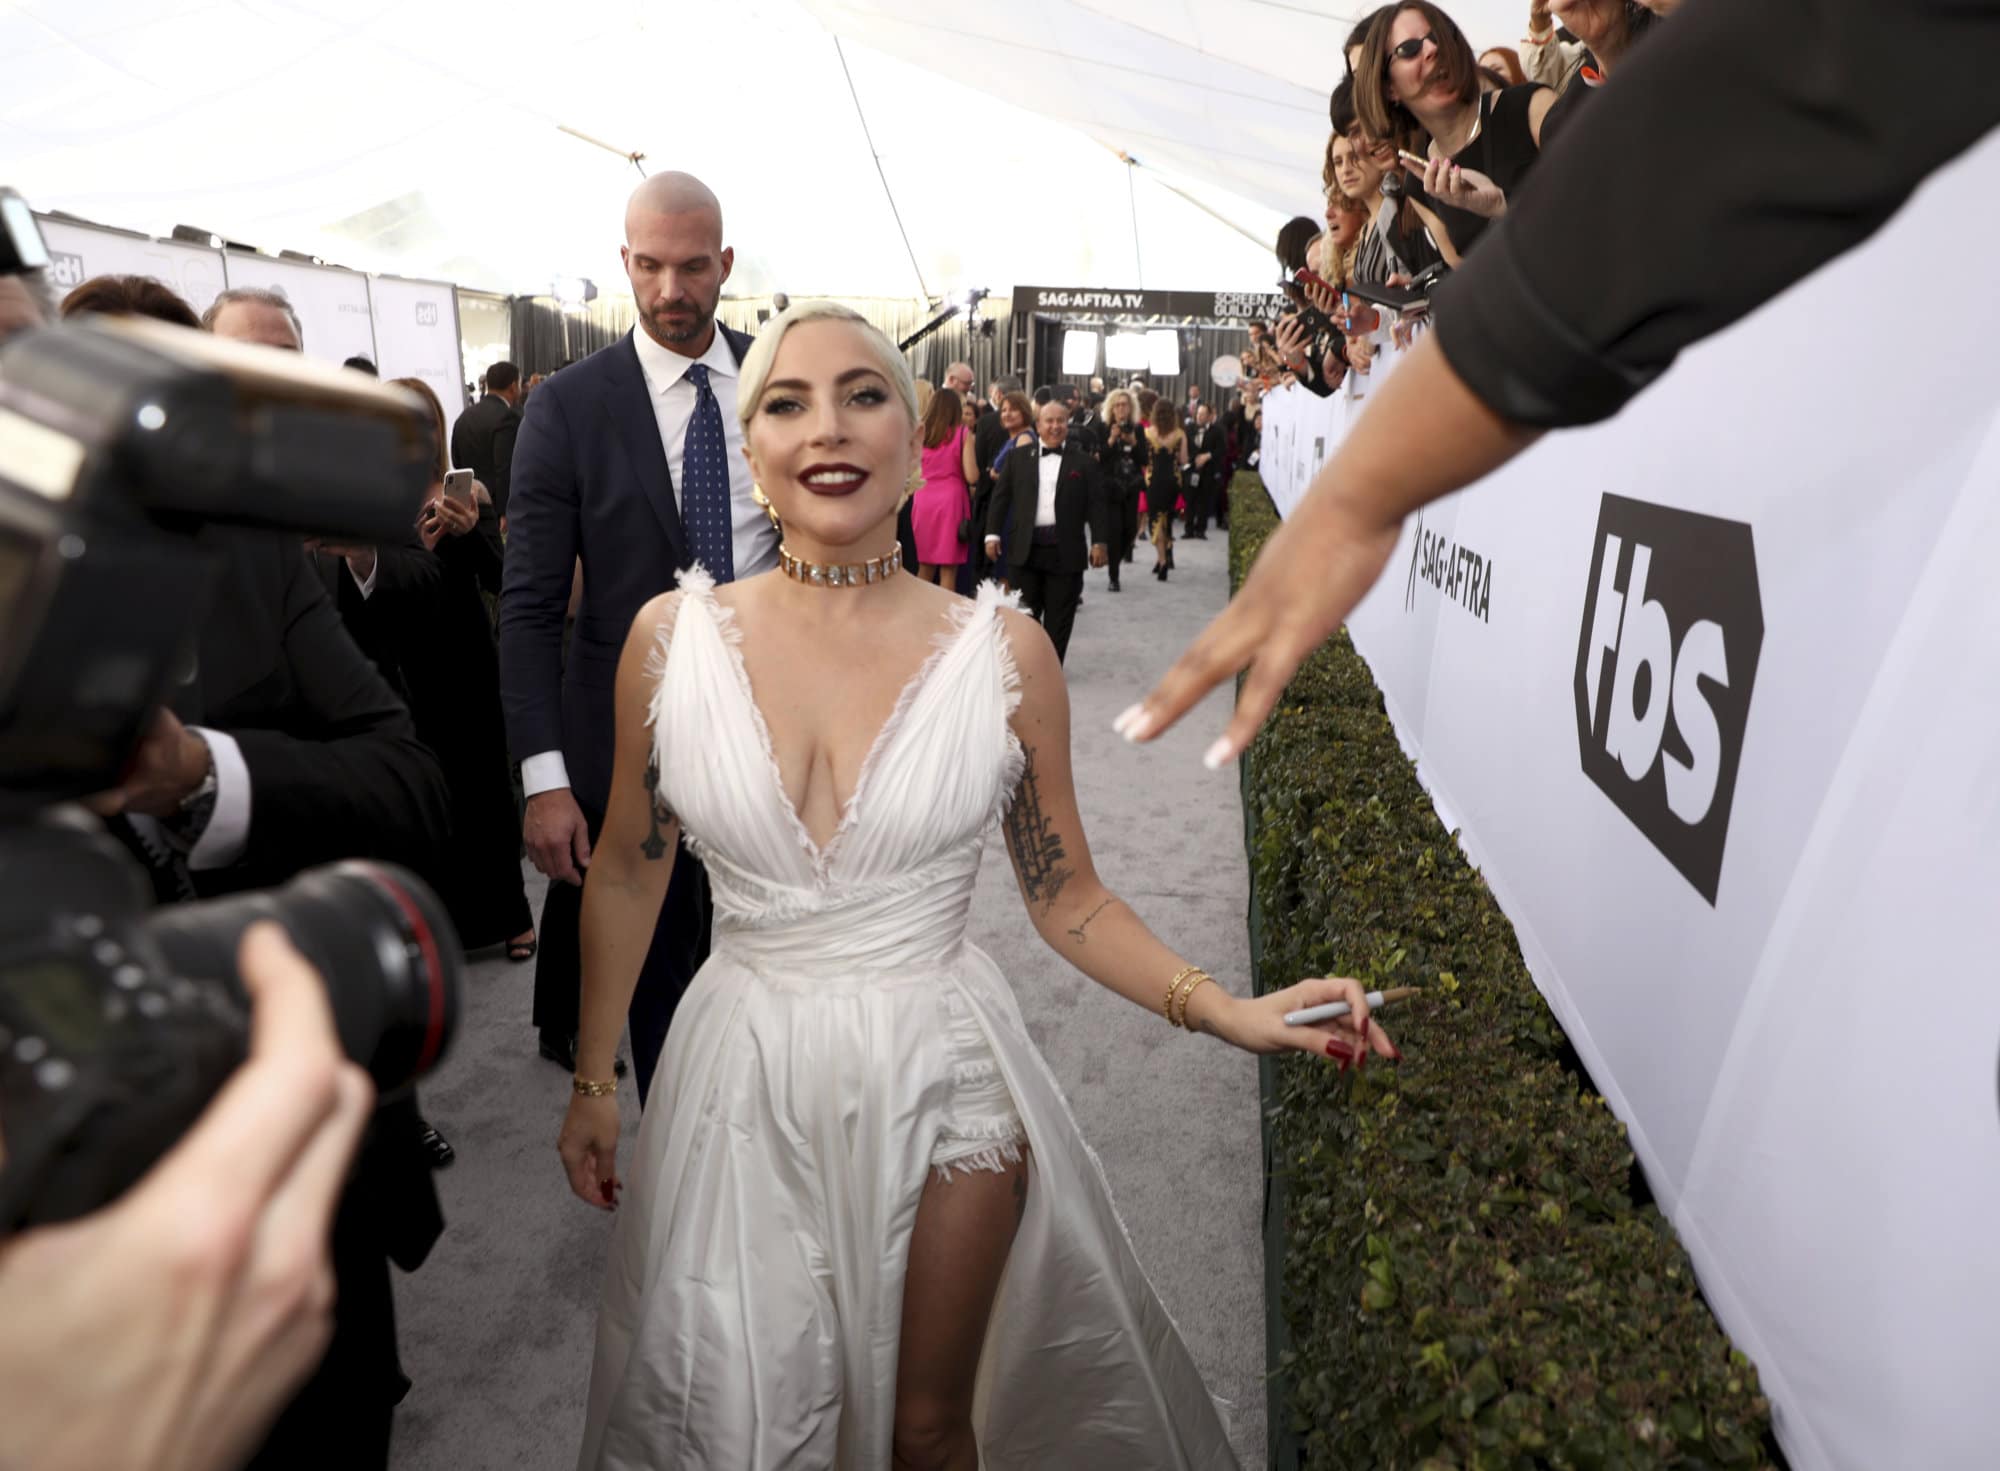 Lady Gaga interacts with fans at the 25th annual Screen Actors Guild Awards at the Shrine Auditorium &amp; Expo Hall on Sunday, Jan. 27, 2019, in Los Angeles. (Photo by Matt Sayles/Invision/AP)